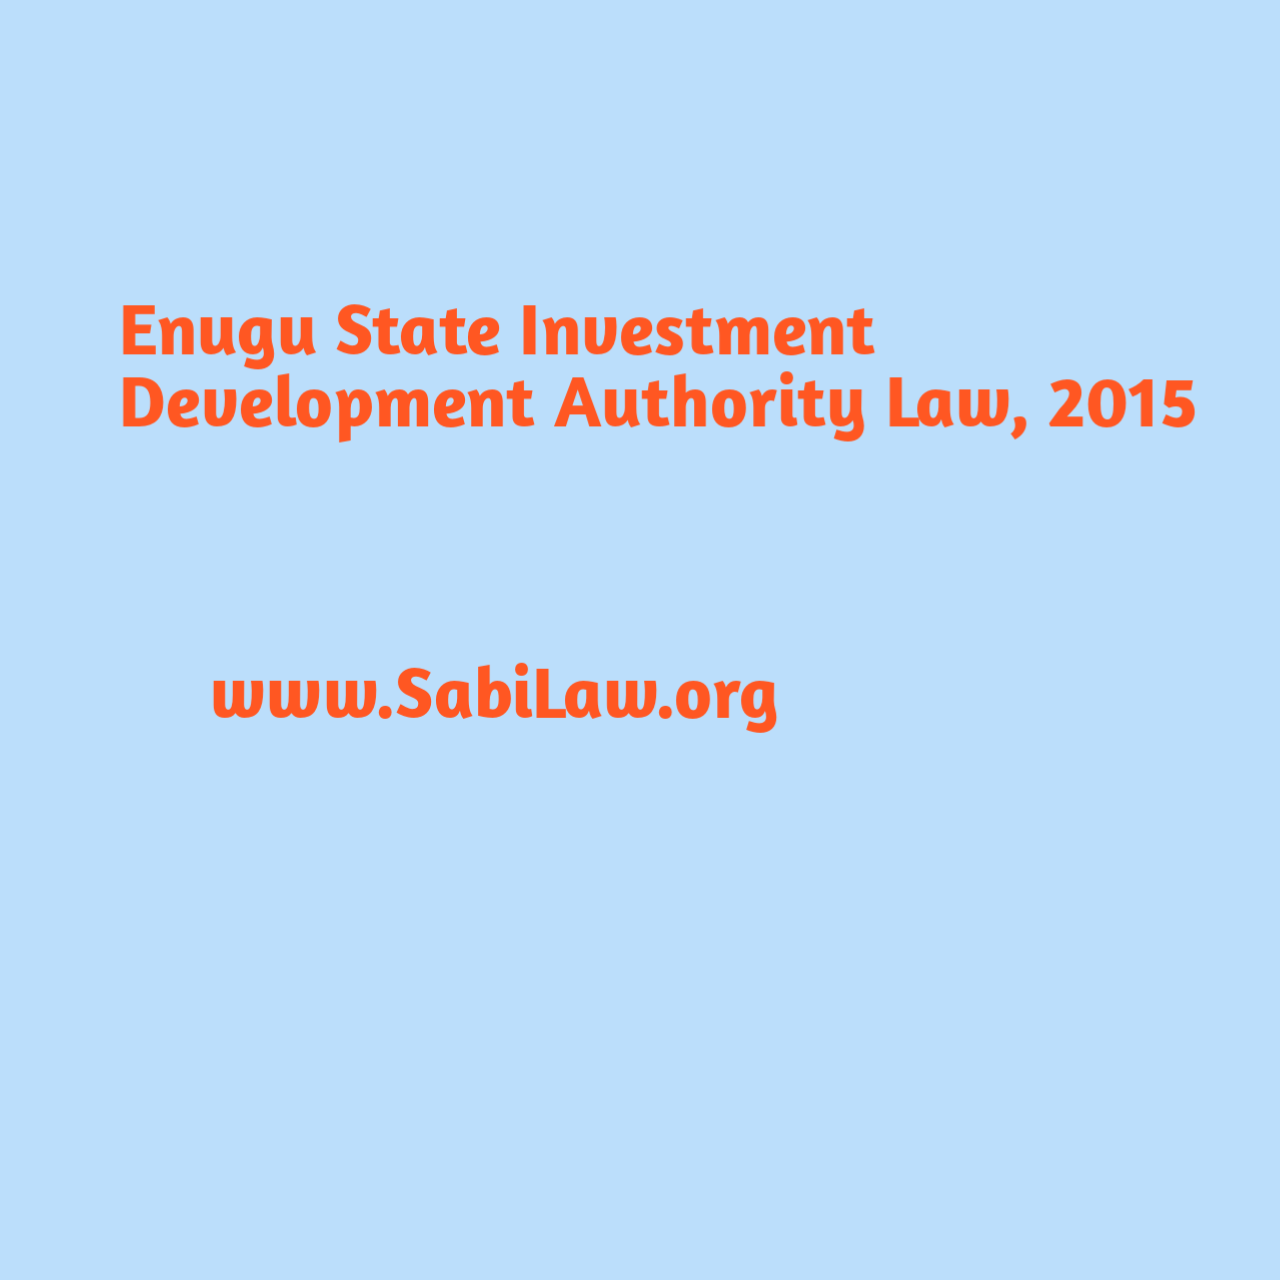 Enugu State Investment Development Authority Law, 2015